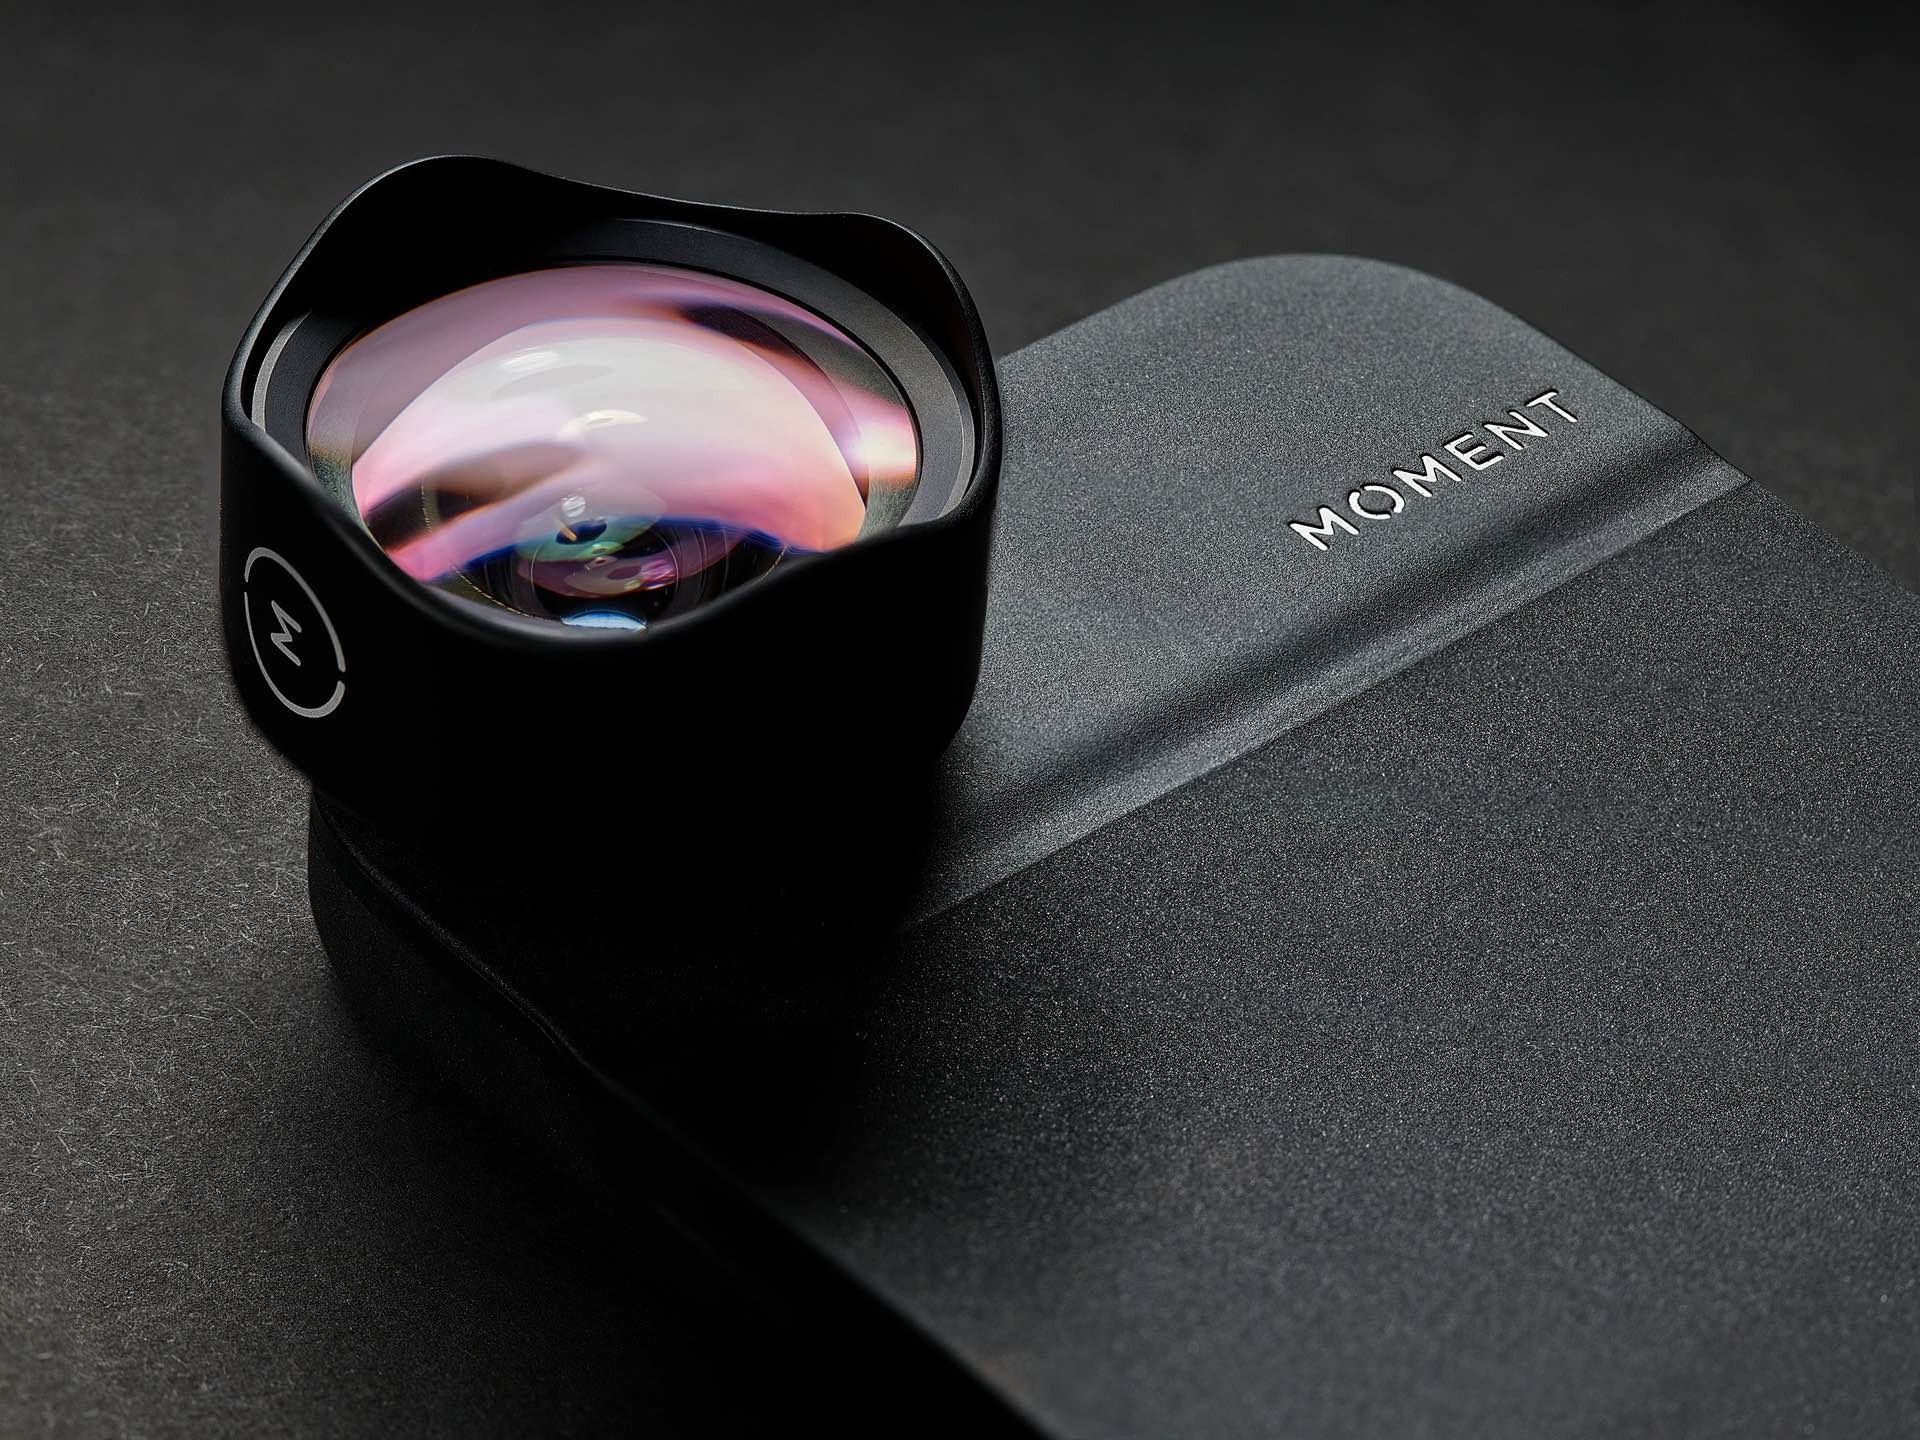 Moment lens-mounting system for iPhone. ($100 per lens, each of which includes a mounting plate)